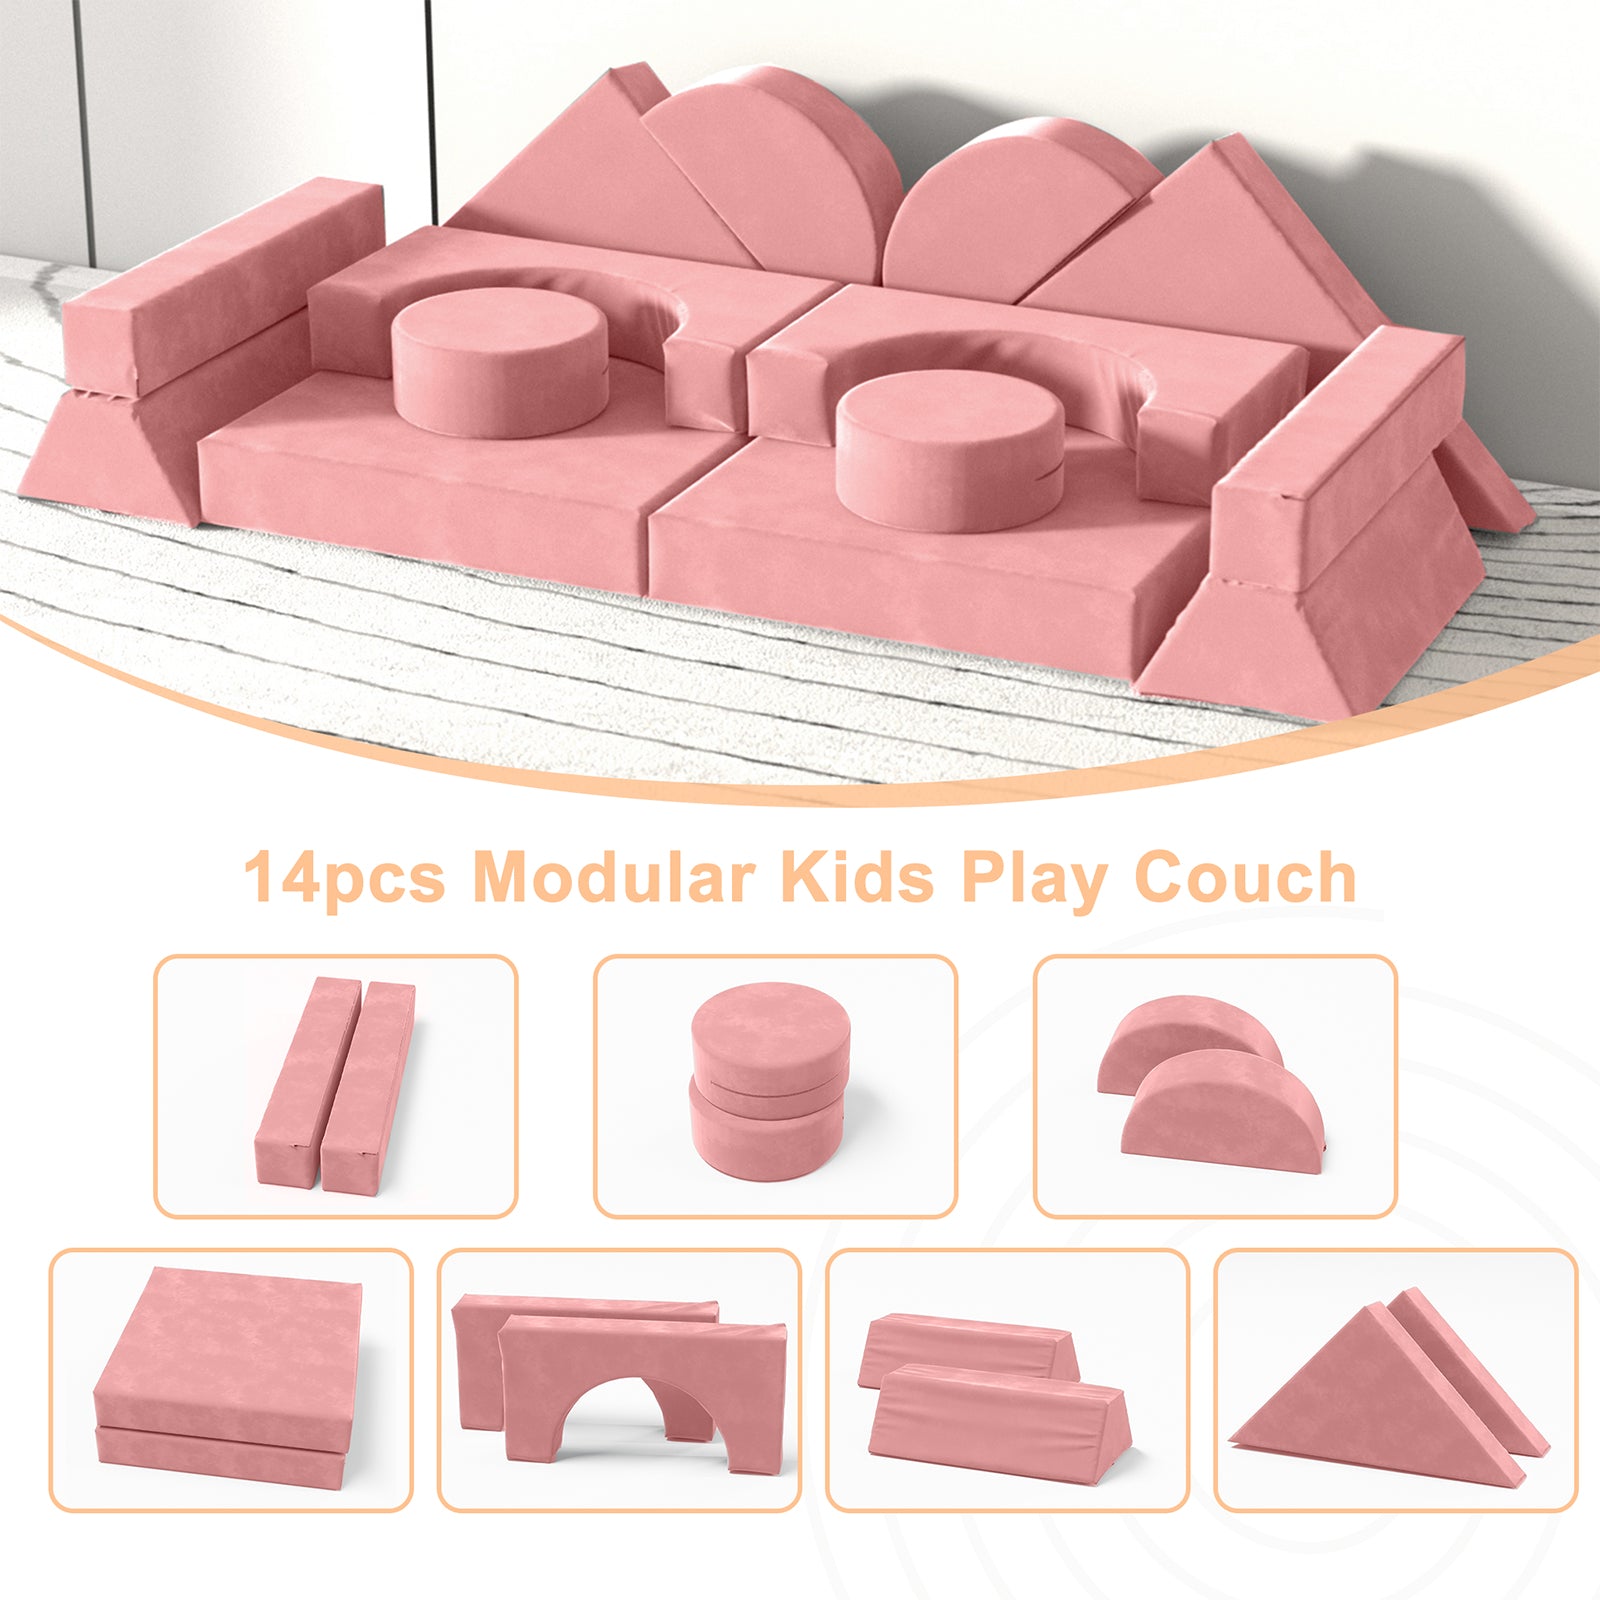 XJD 14-Piece Modular Kids Play Couch Set, Children's Combination Sofa, Bedroom and Playroom Children's Furniture, Convertible Foam and Floor Cushions, Pink